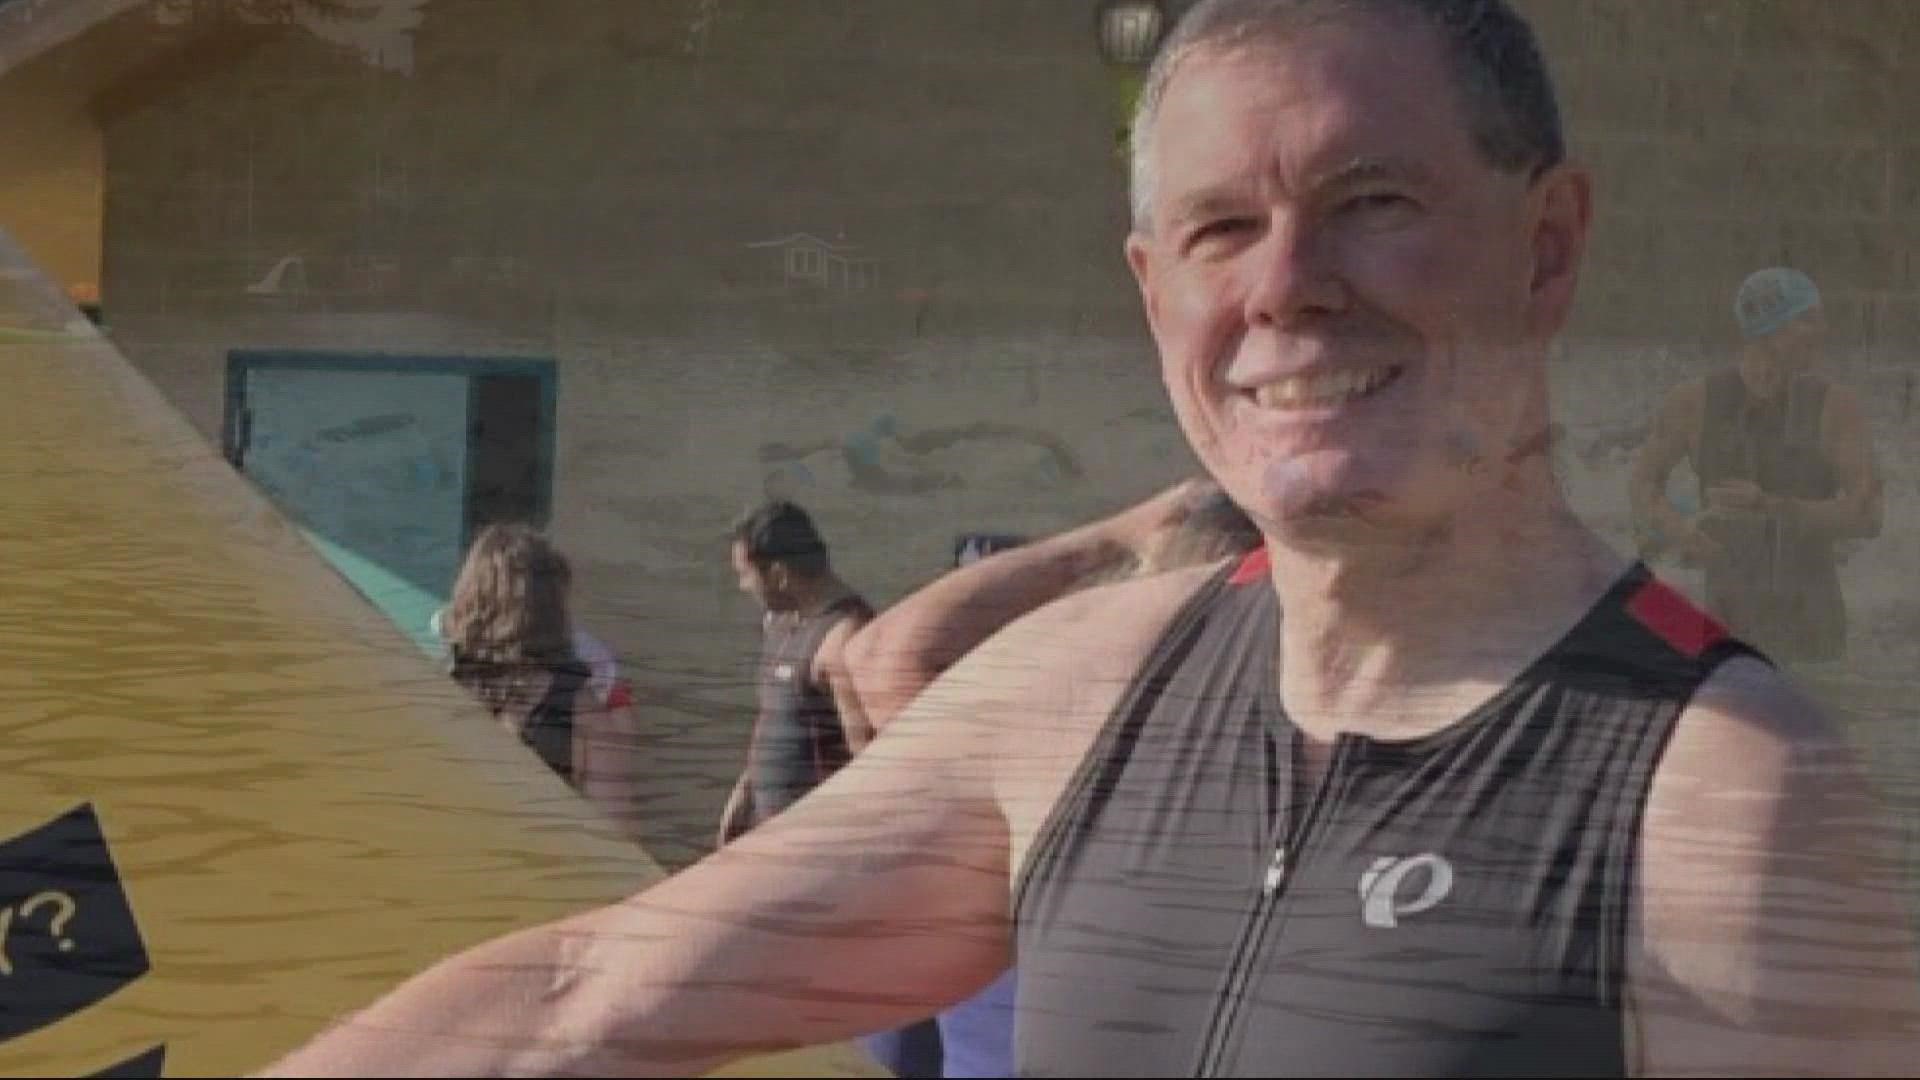 A local doctor became the patient after going into cardiac arrest during the swimming portion of a triathlon. He has a long road ahead but is recovering.